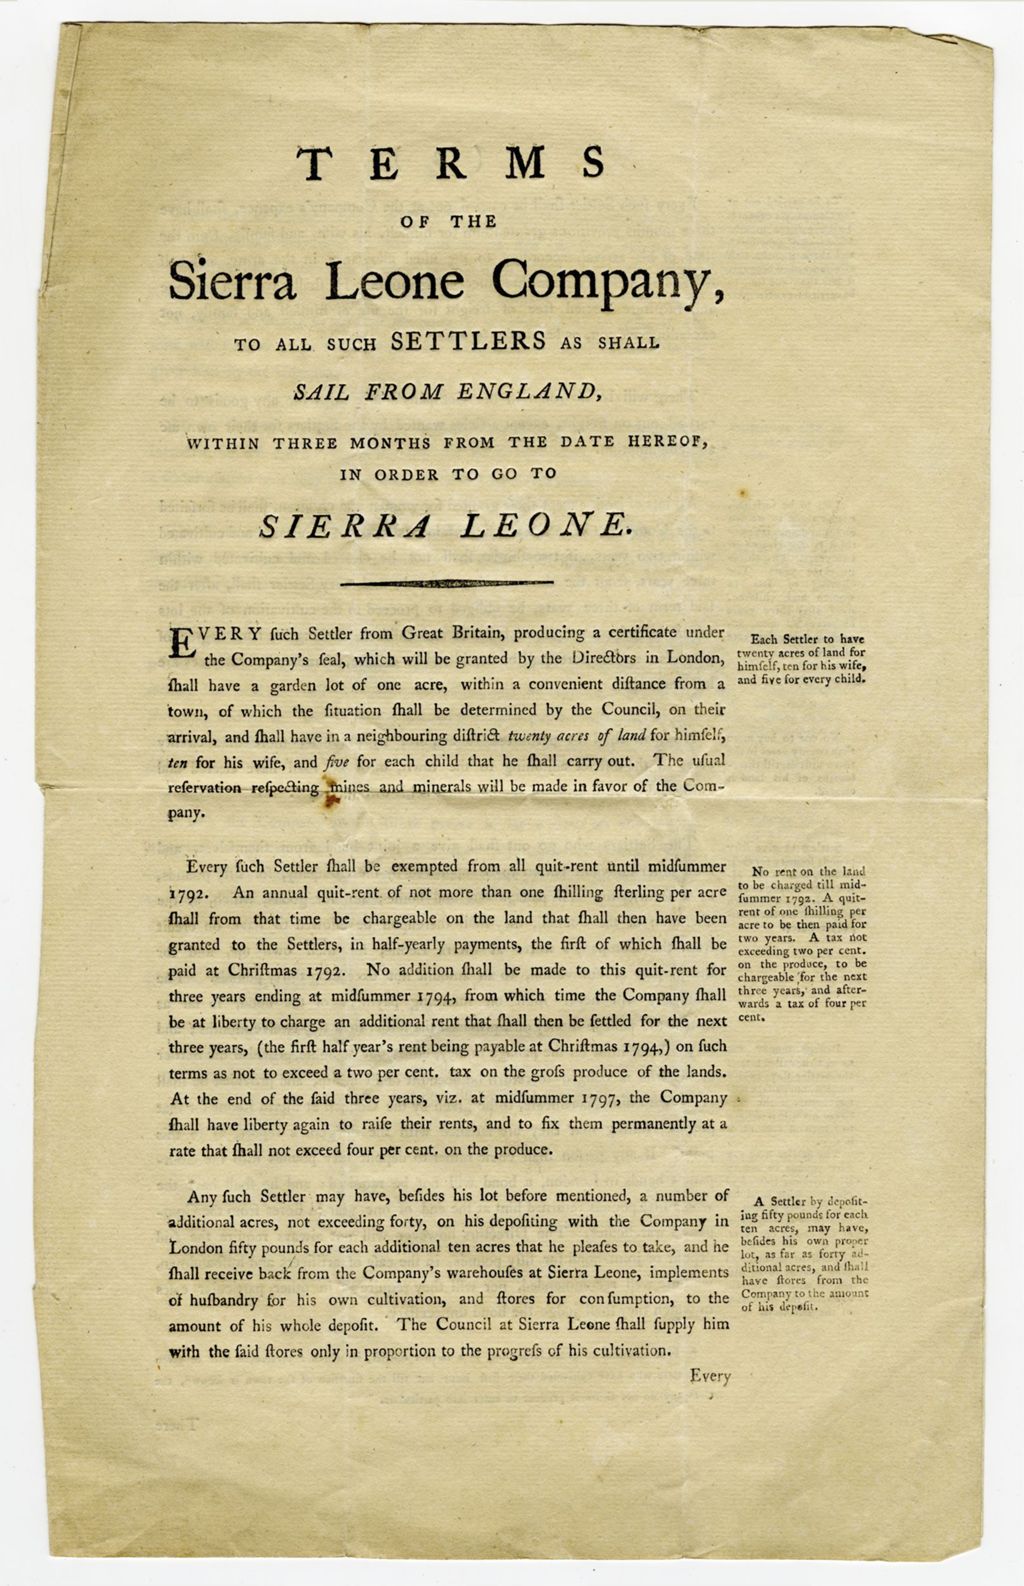 Terms of the Sierra Leone Company